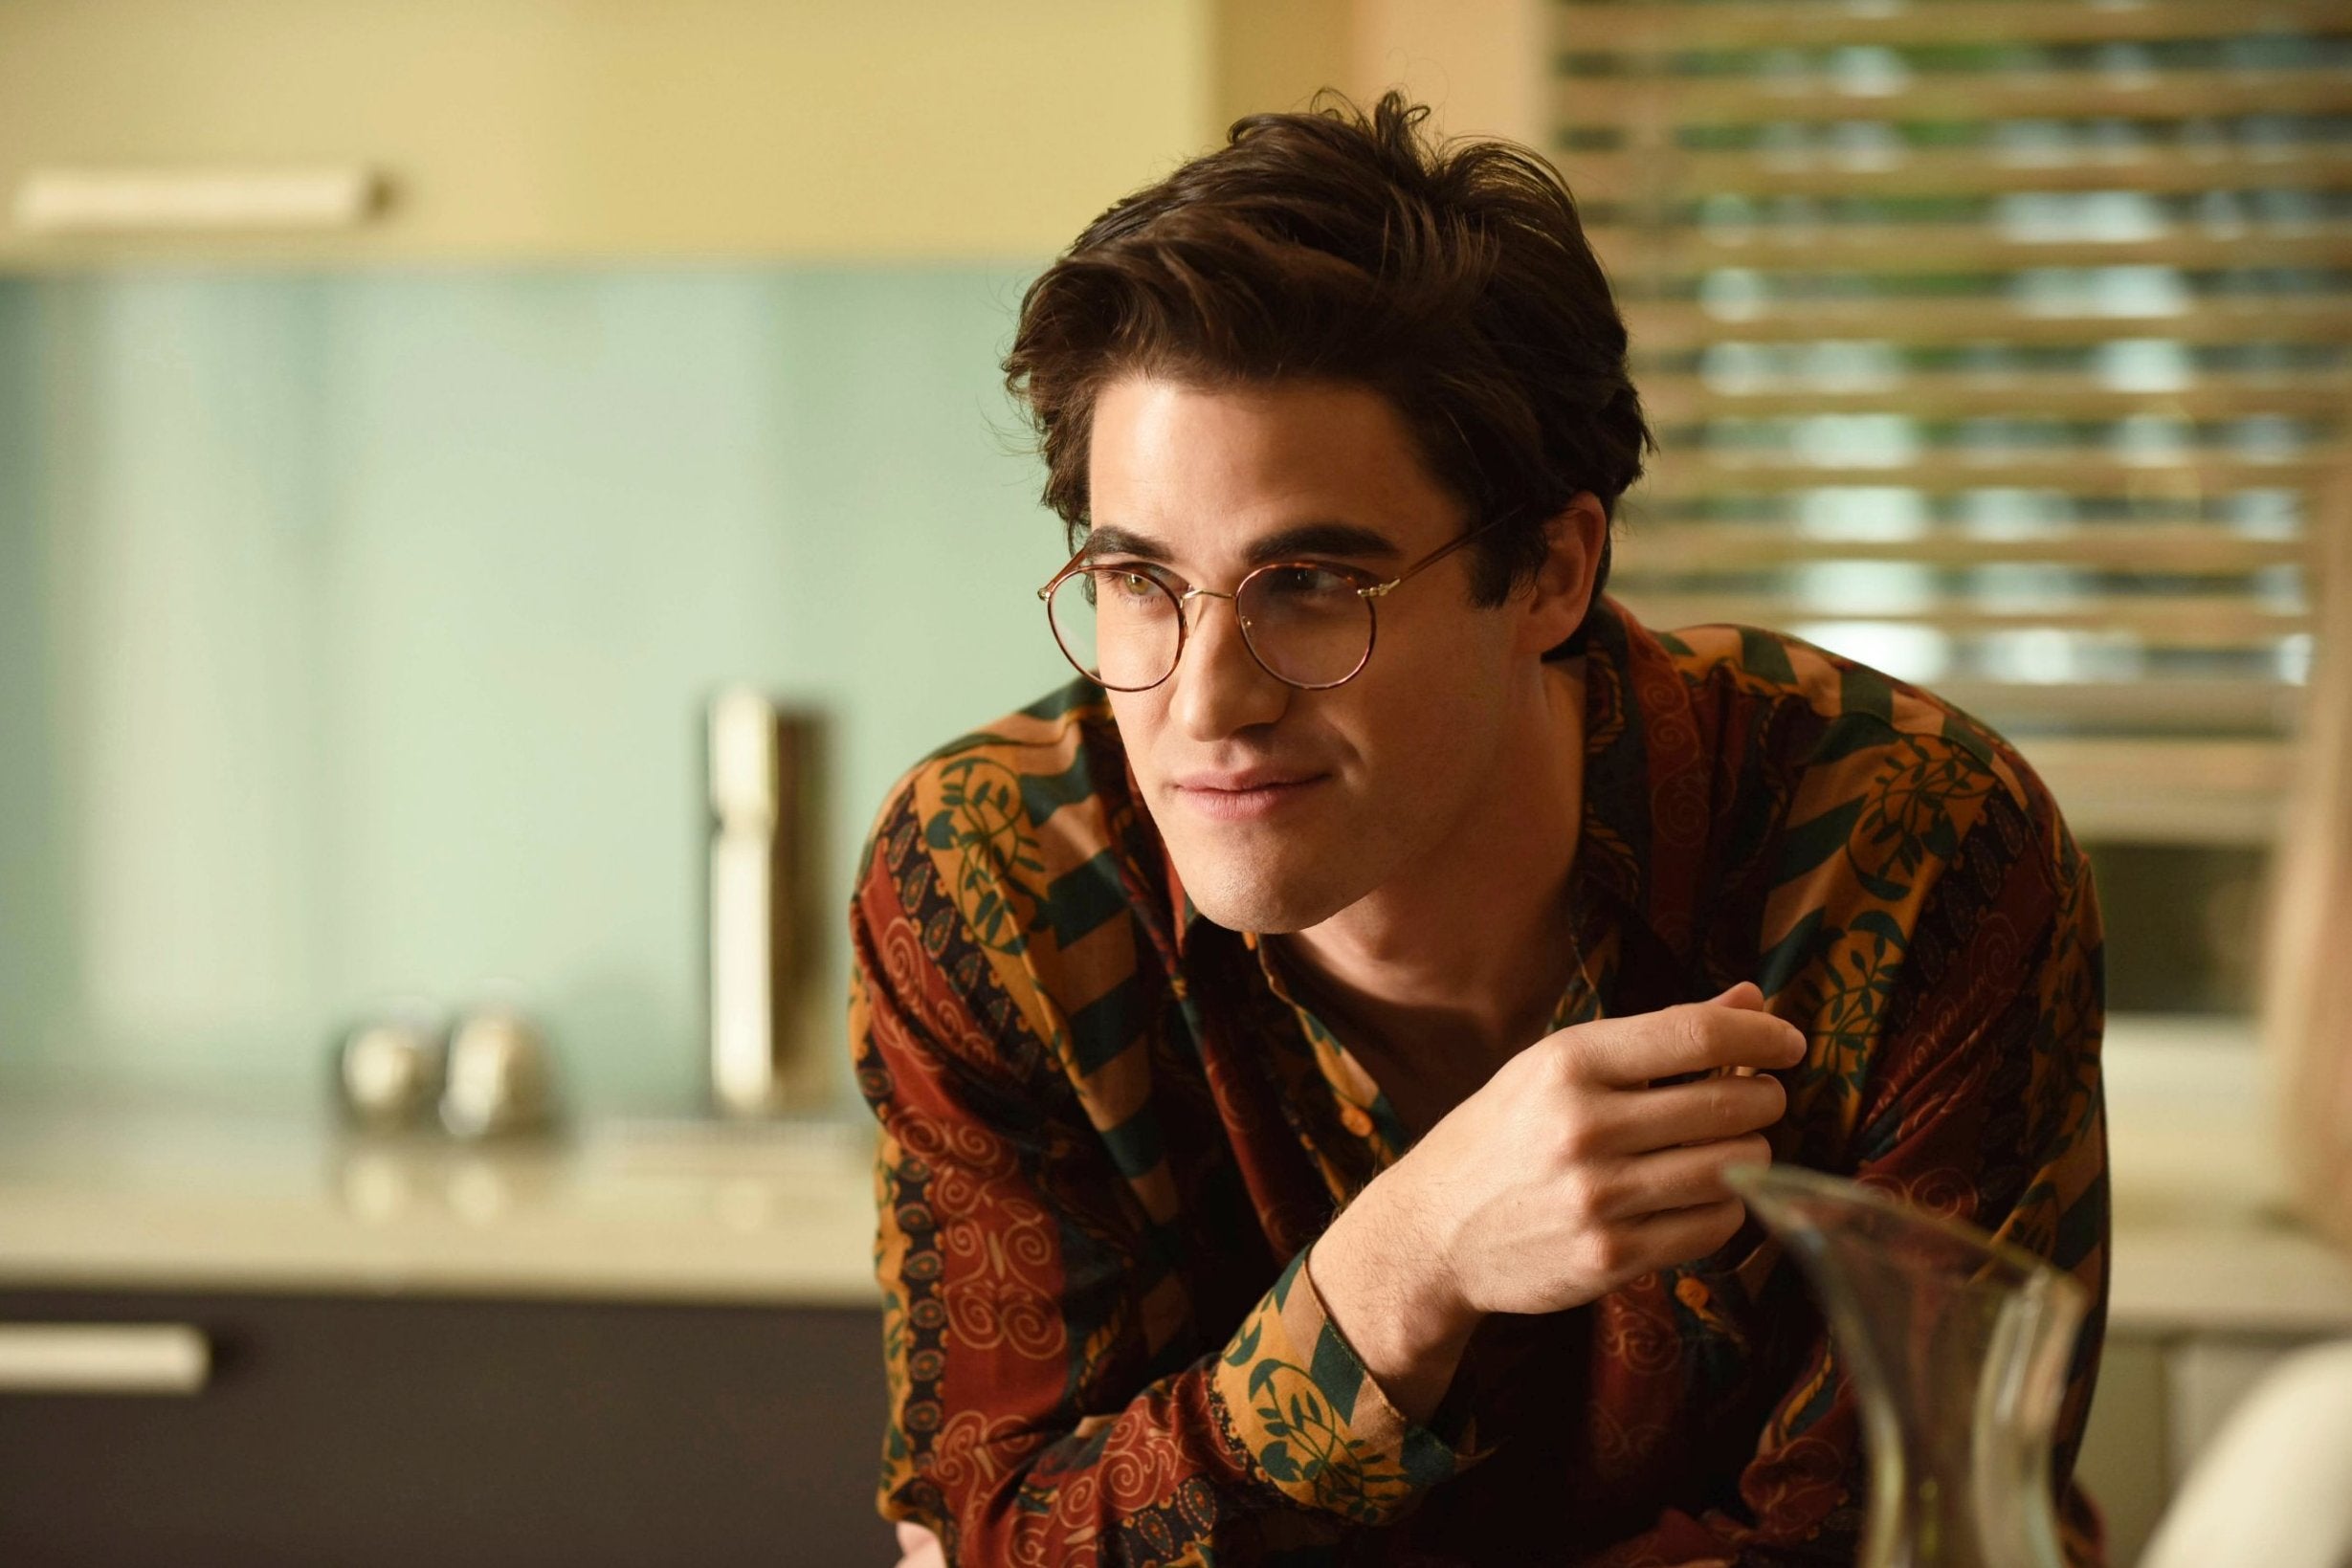 Best Performance by an Actor in a Limited Series or Motion Picture Made for Television: Darren Criss (The Assassination of Gianni Versace: American Crime Story)